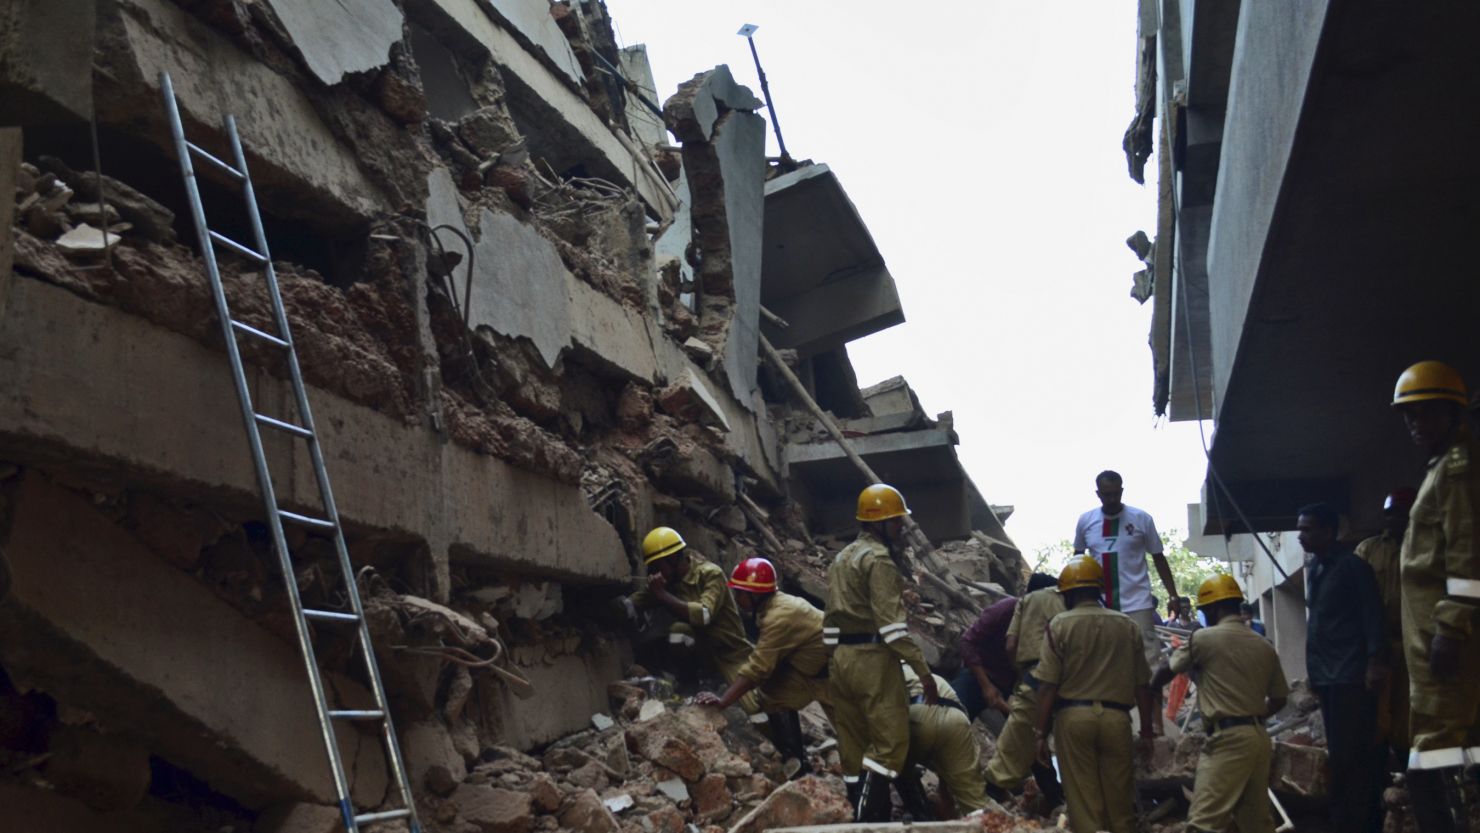 Rescue workers stand amid the debris of a building under construction that collapsed in Goa, India on 5 January. 